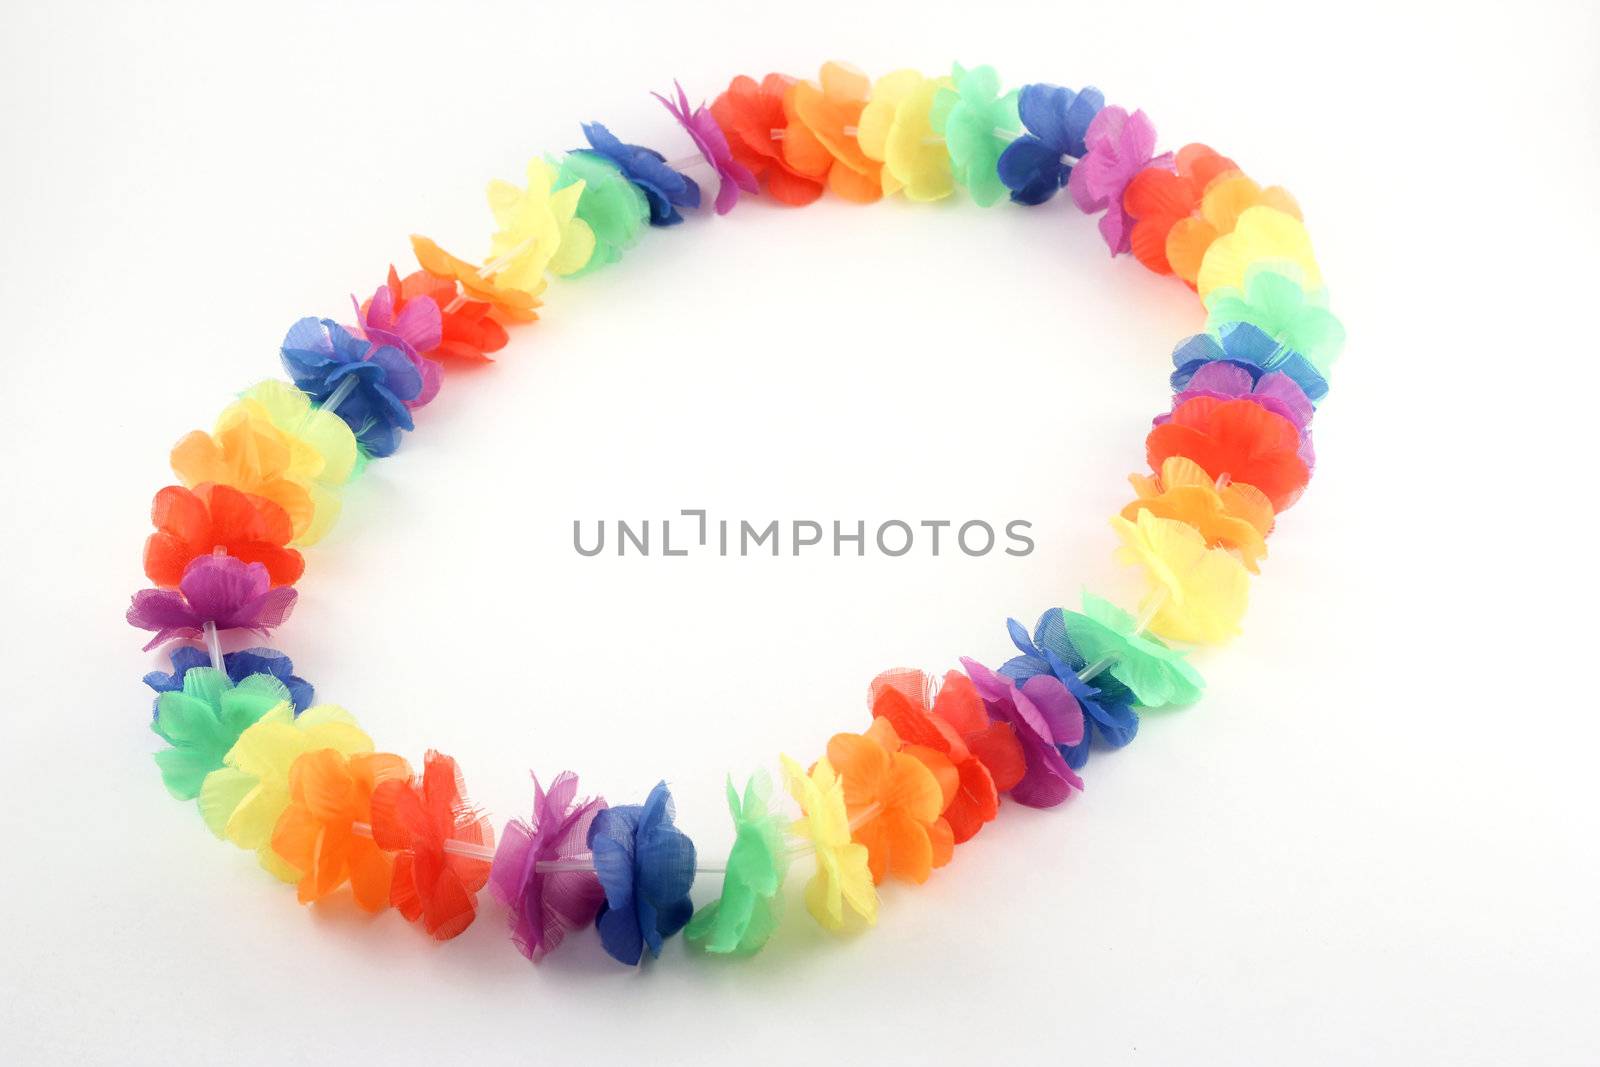 A colorful Hawaiian lei with bright colorful flowers on white background